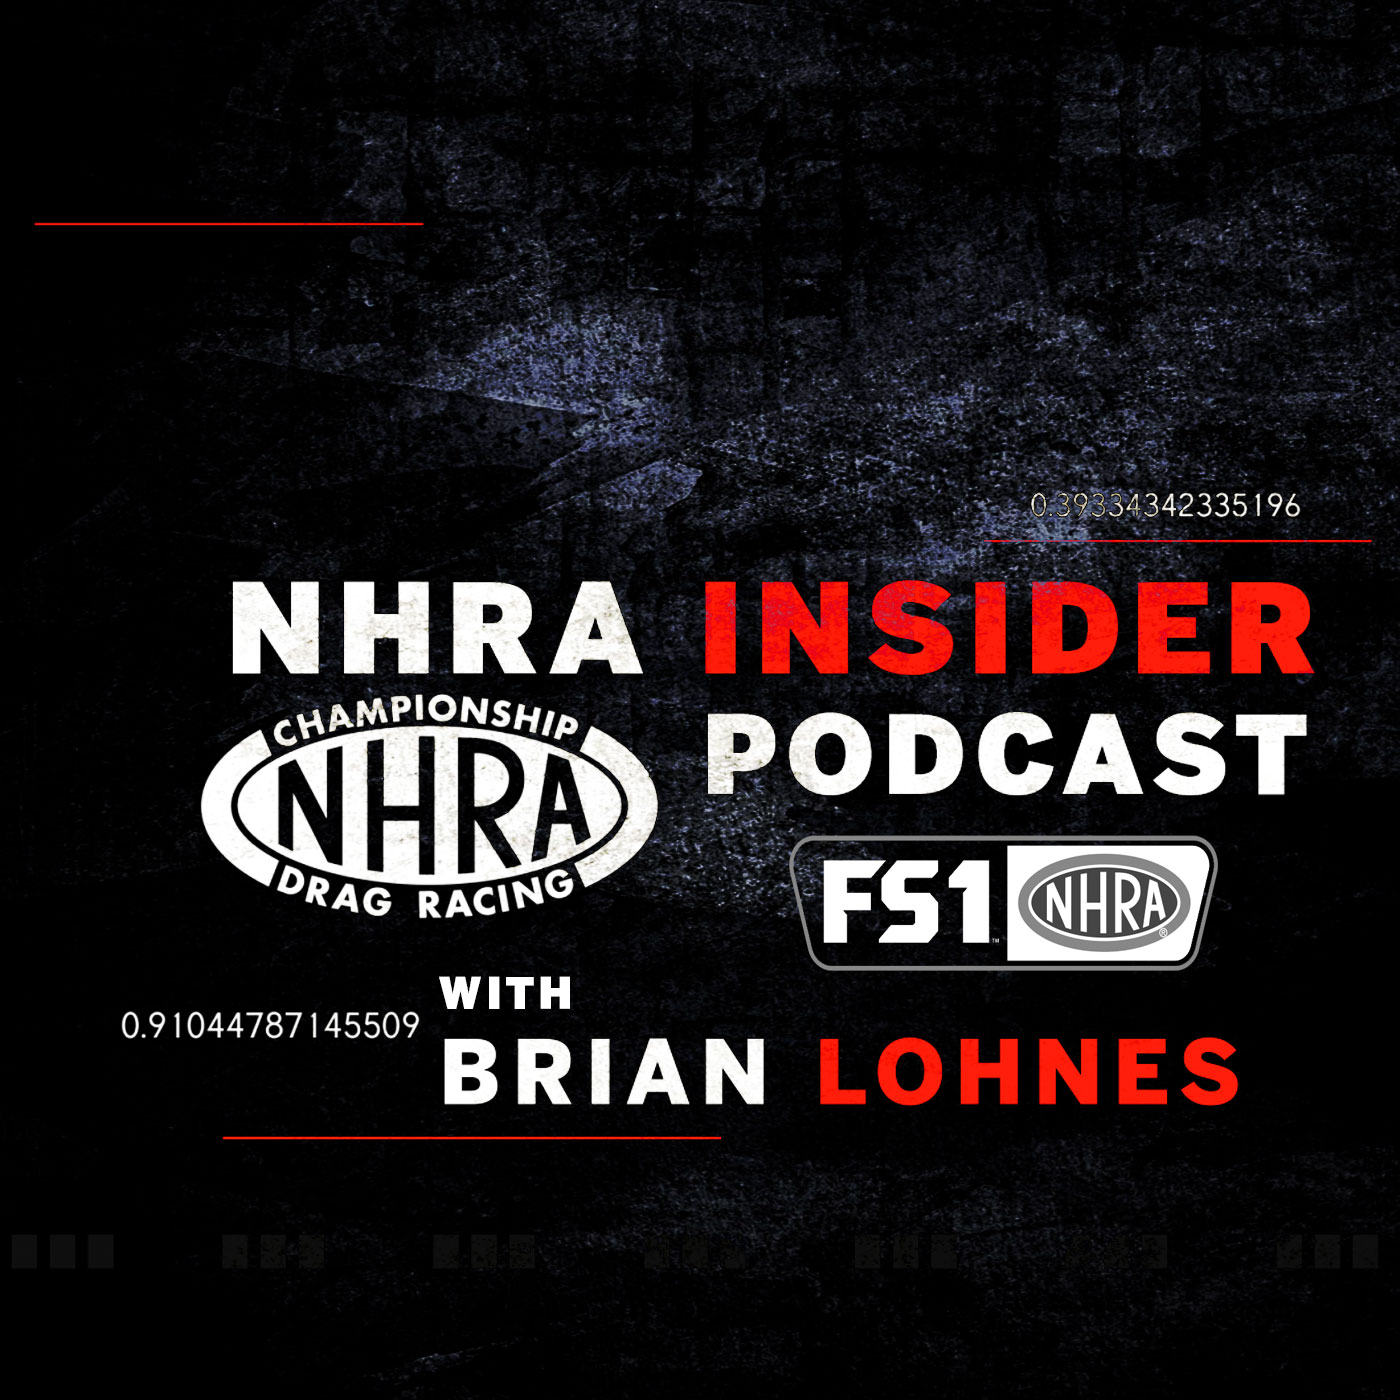 NHRA Insider: The Young Operators – Listen To Two Young, Innovative, and Forward Looking Track Operators Talk About The Present and the Future